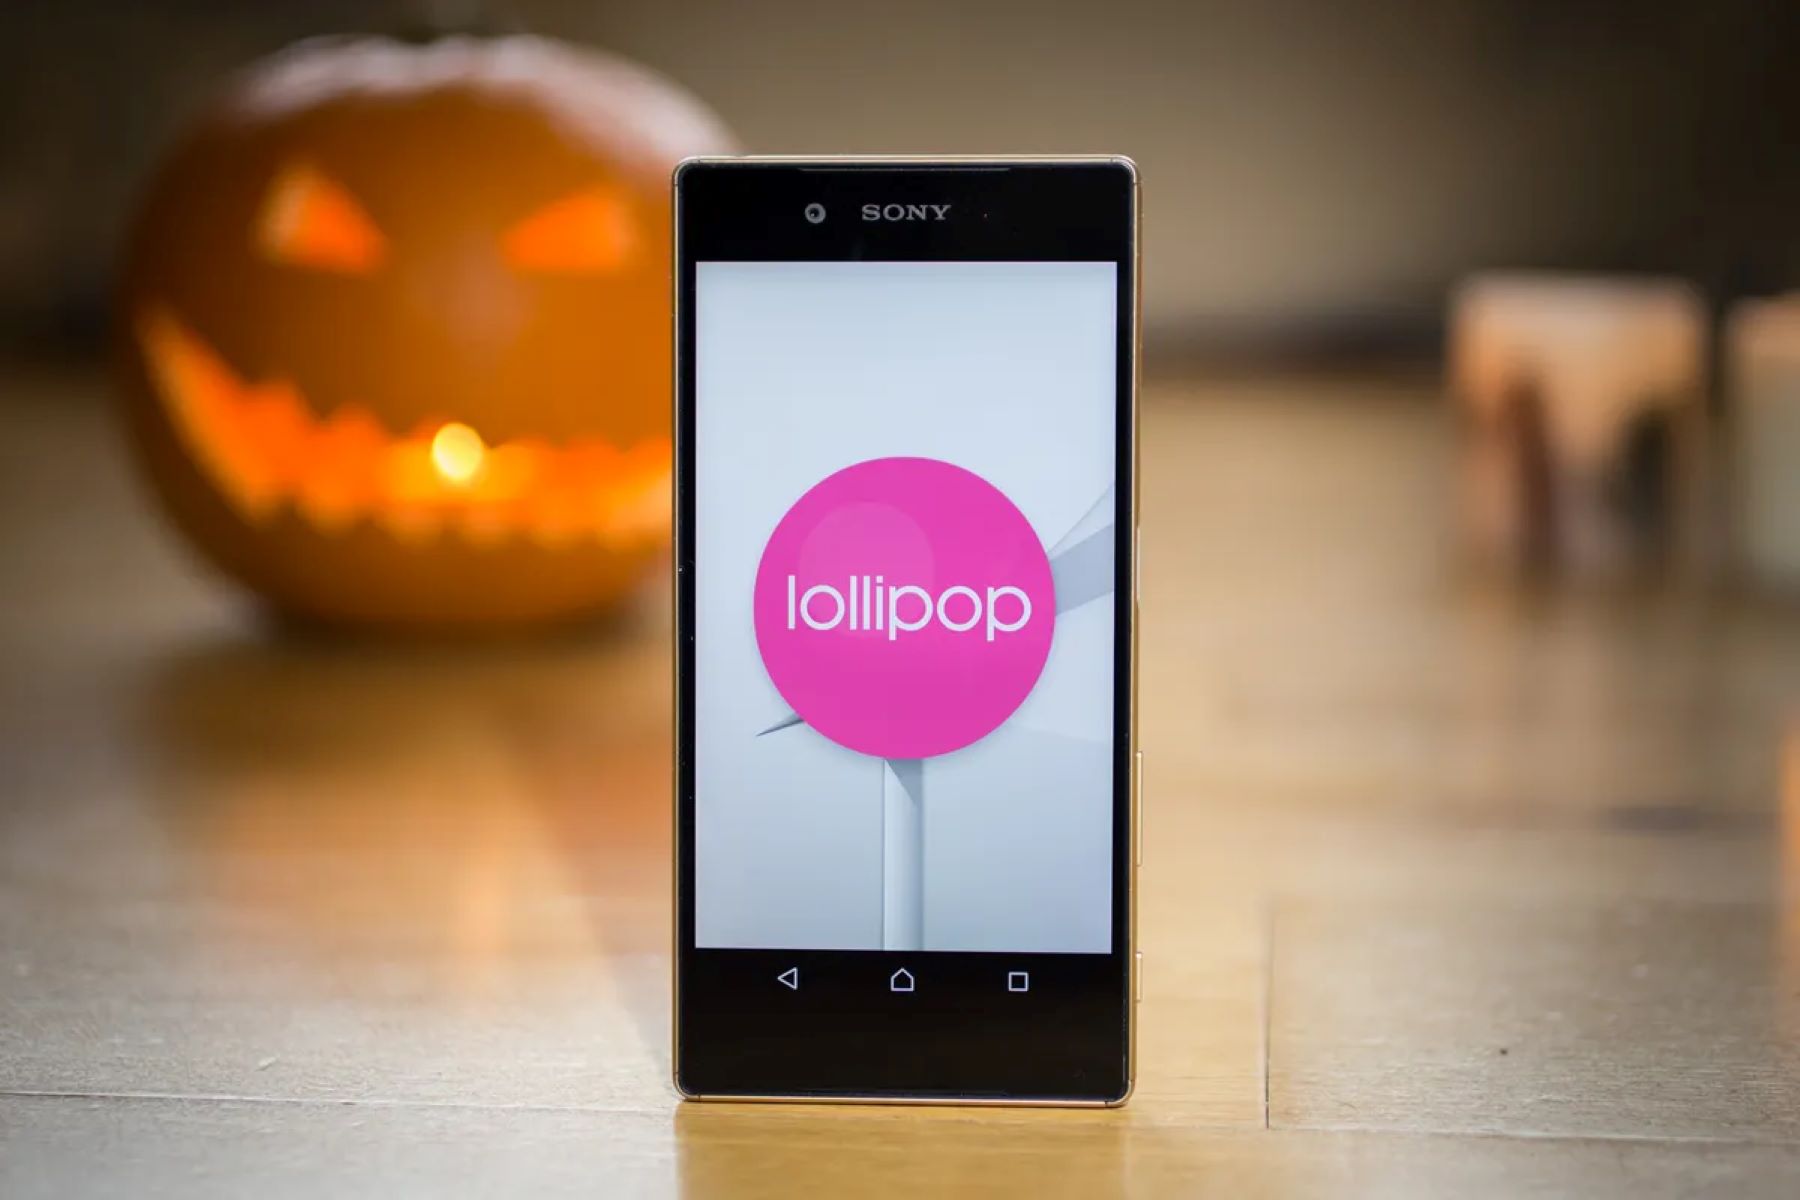 Upgrading Sony Xperia Z C6606 To Lollipop: A Step-by-Step Guide